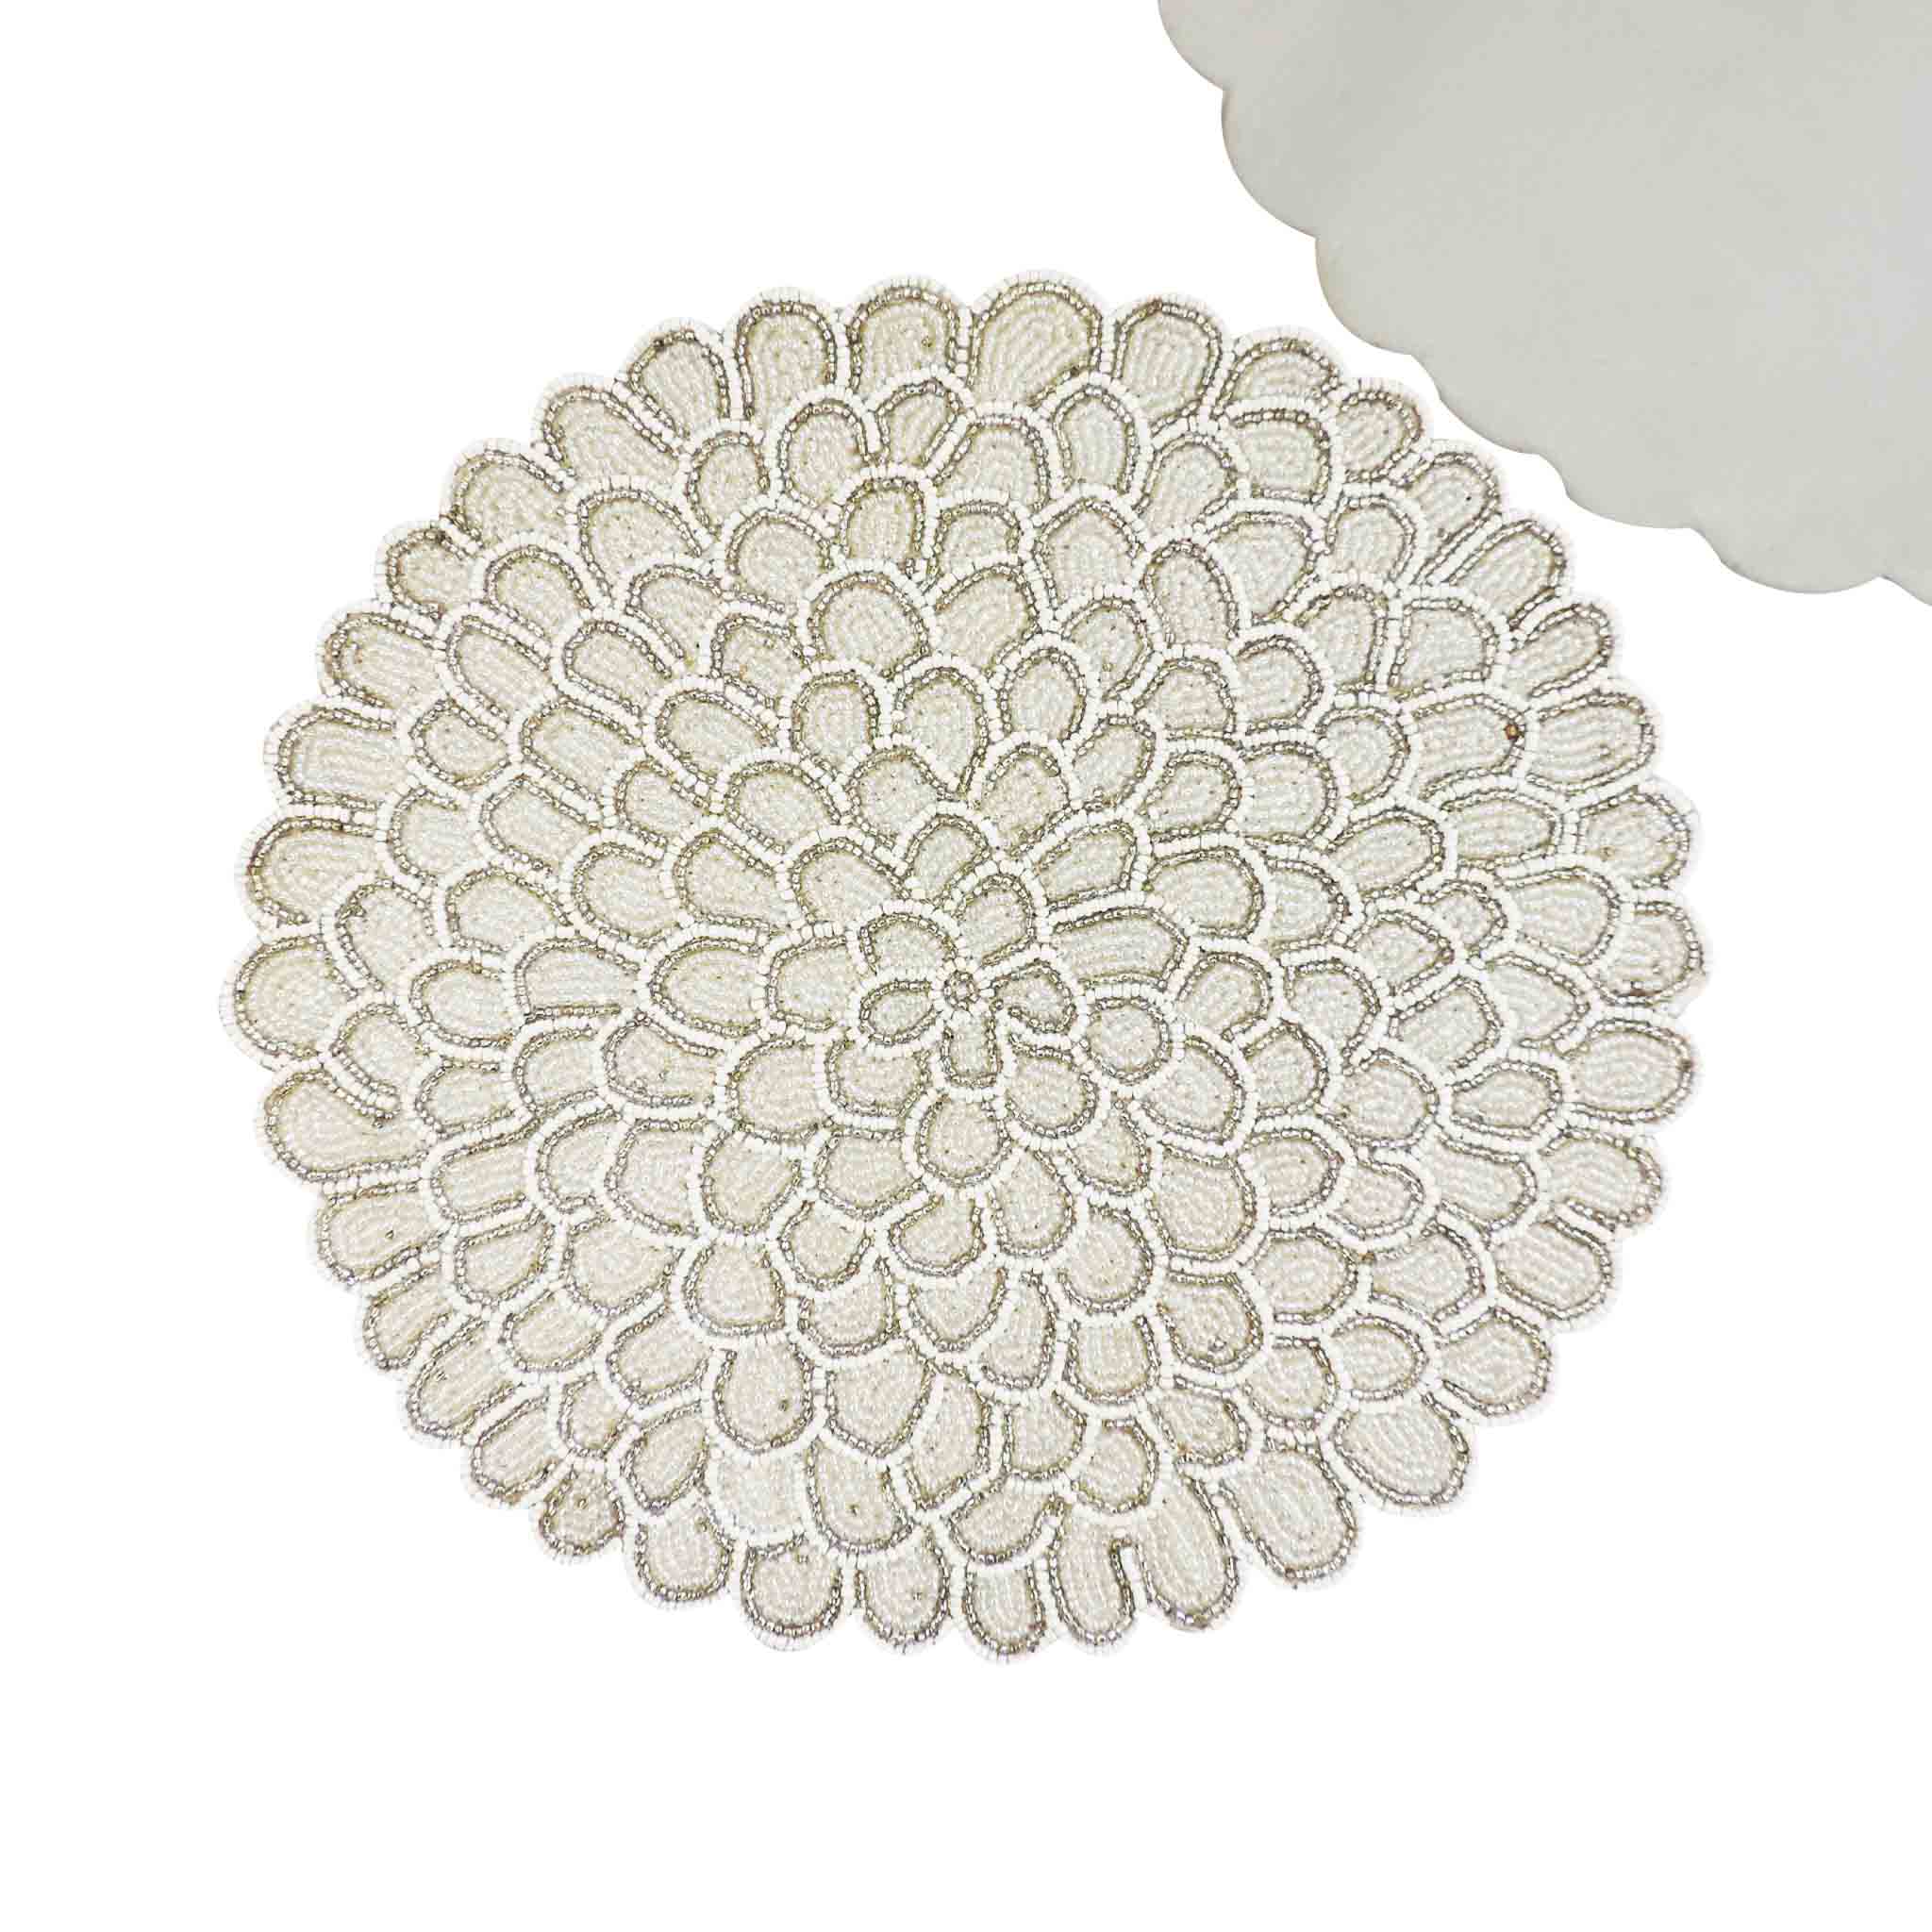 Dahlia Bead Embroidered Placemat in Cream & Silver, Set of 2